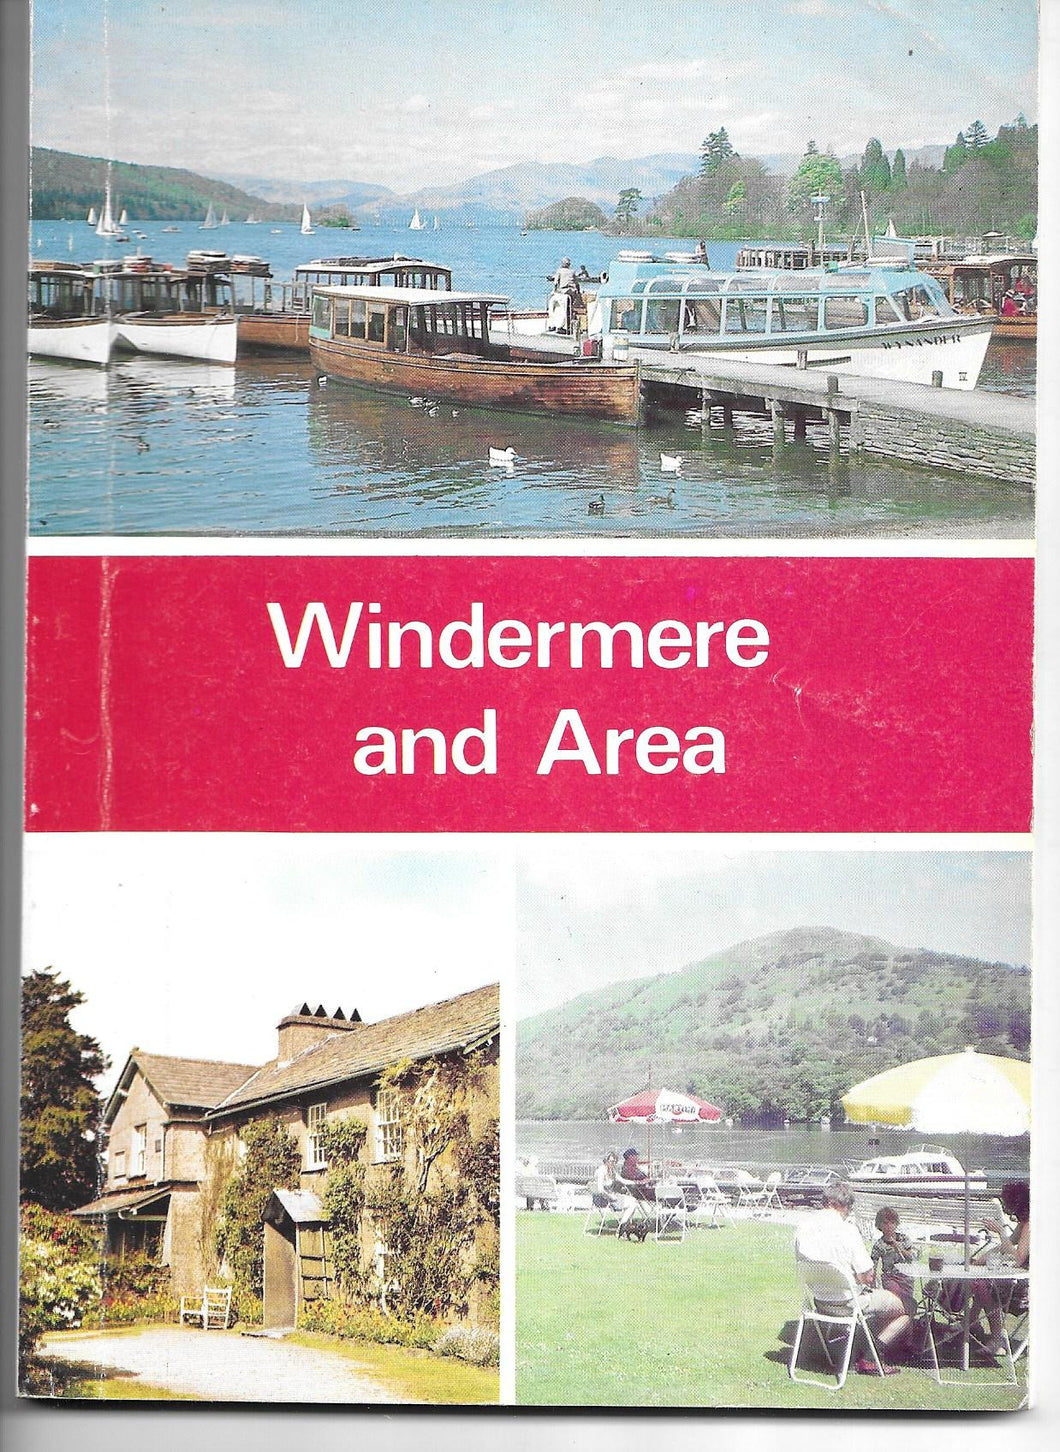 Windermere and Area, Tourist information, 1970's 1980's. Paperback.